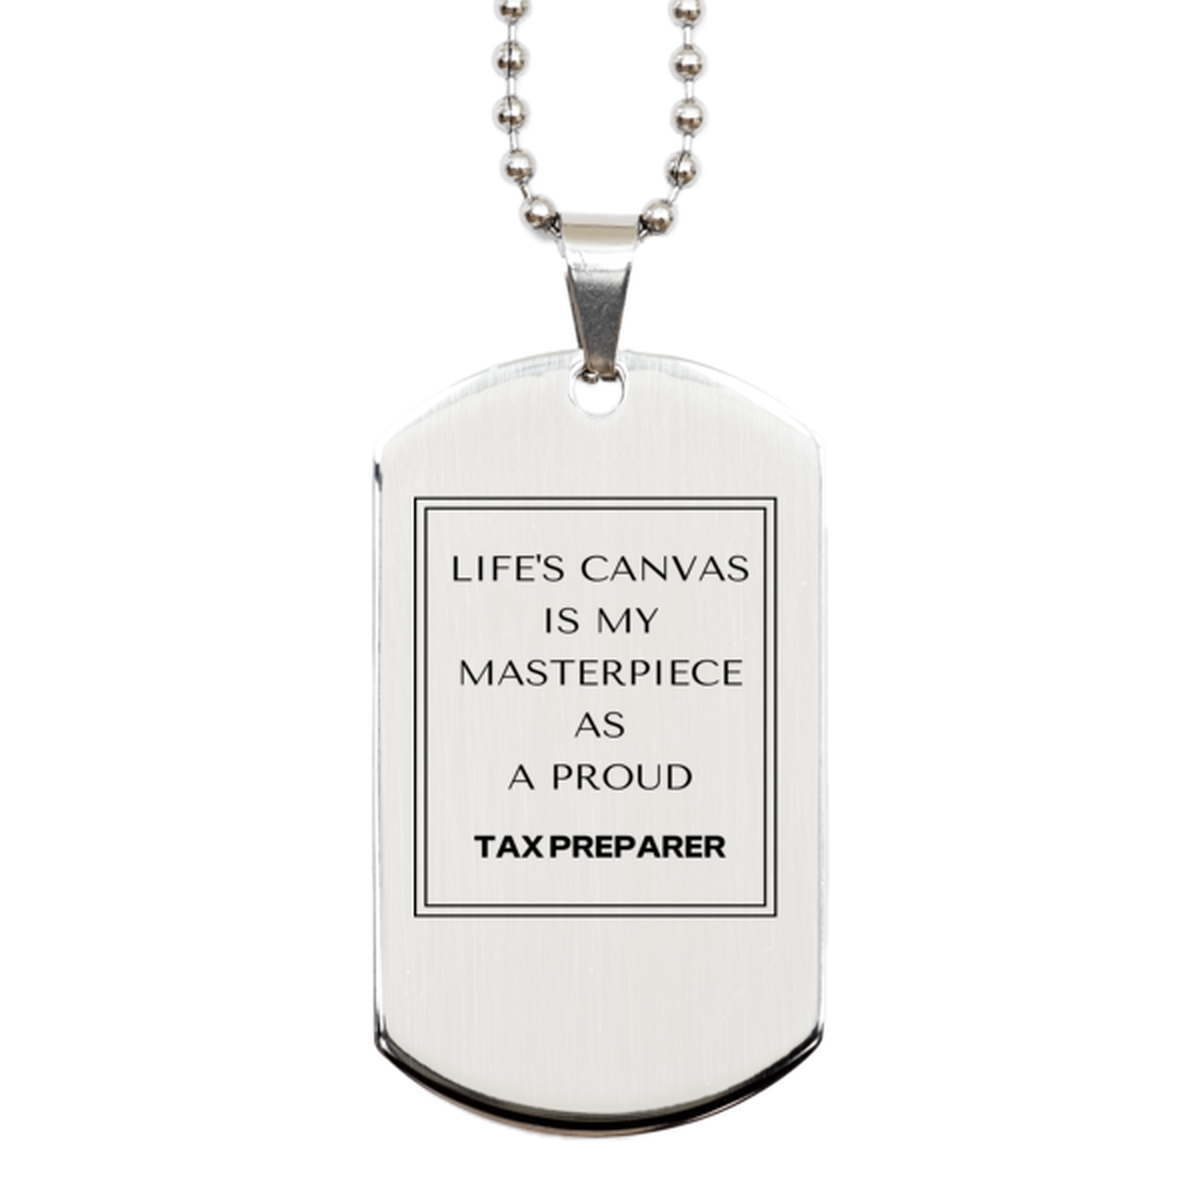 Proud Tax Preparer Gifts, Life's canvas is my masterpiece, Epic Birthday Christmas Unique Silver Dog Tag For Tax Preparer, Coworkers, Men, Women, Friends